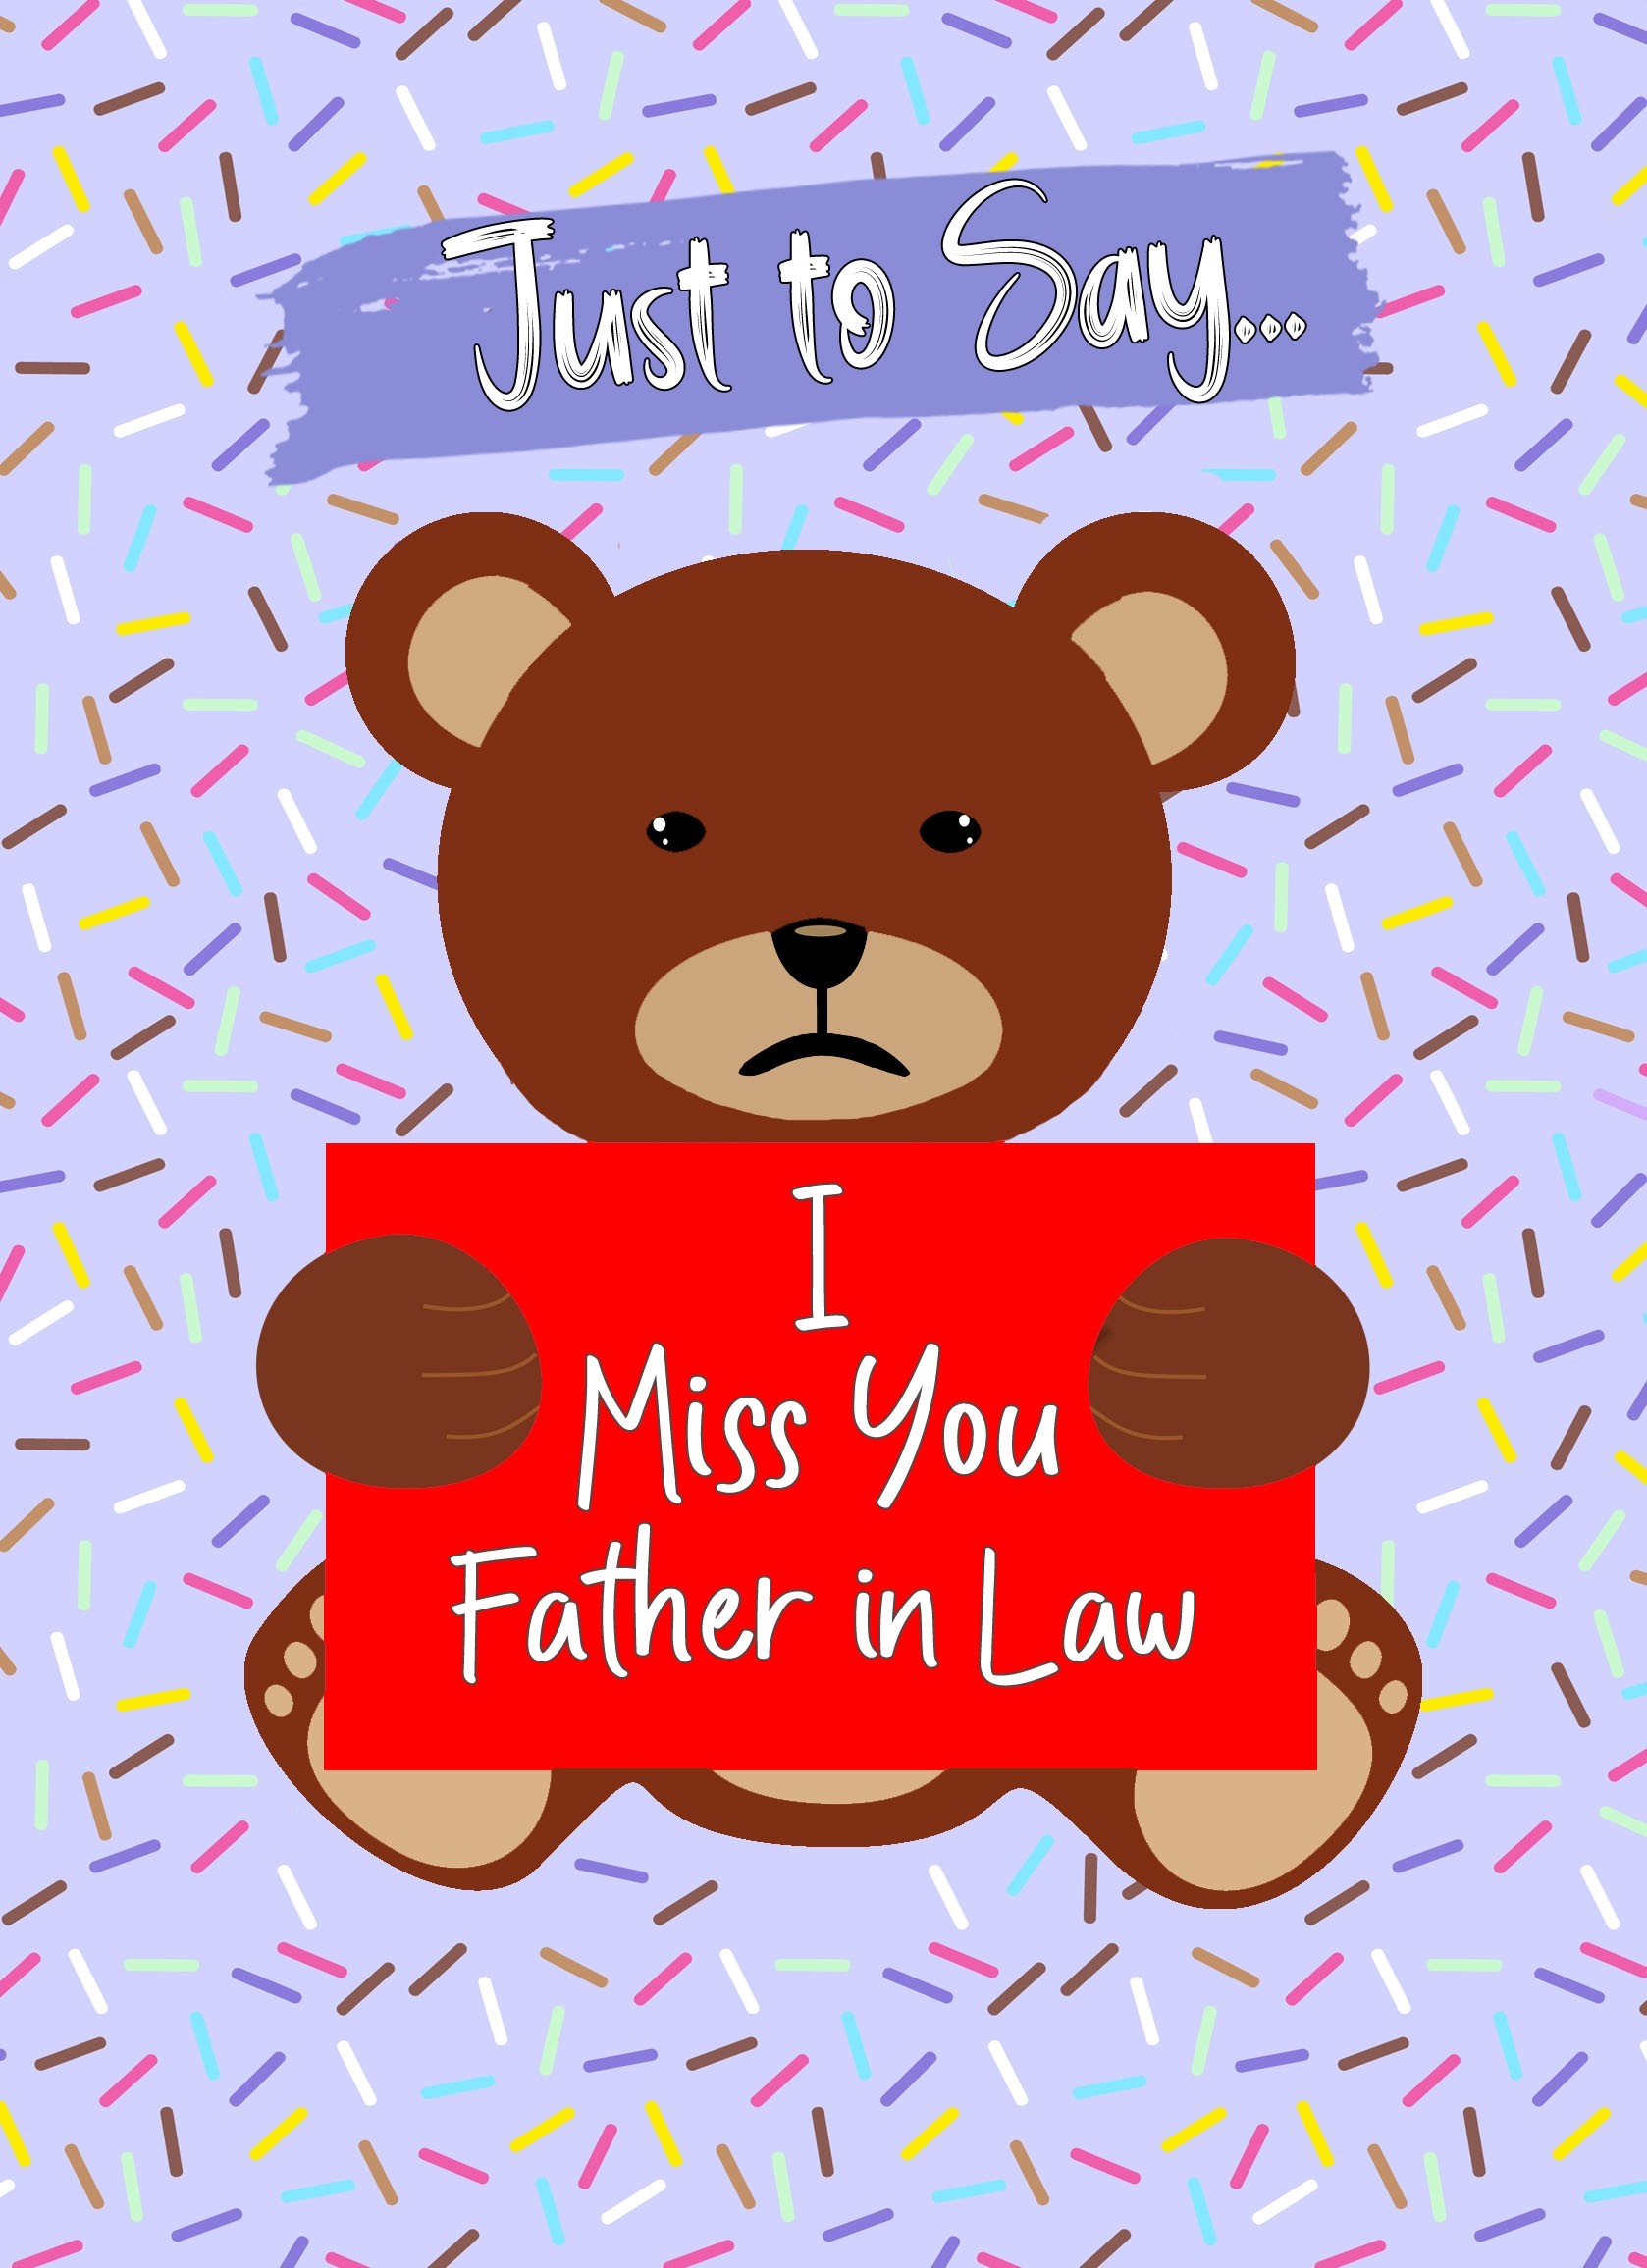 Missing You Card For Father in Law (Bear)